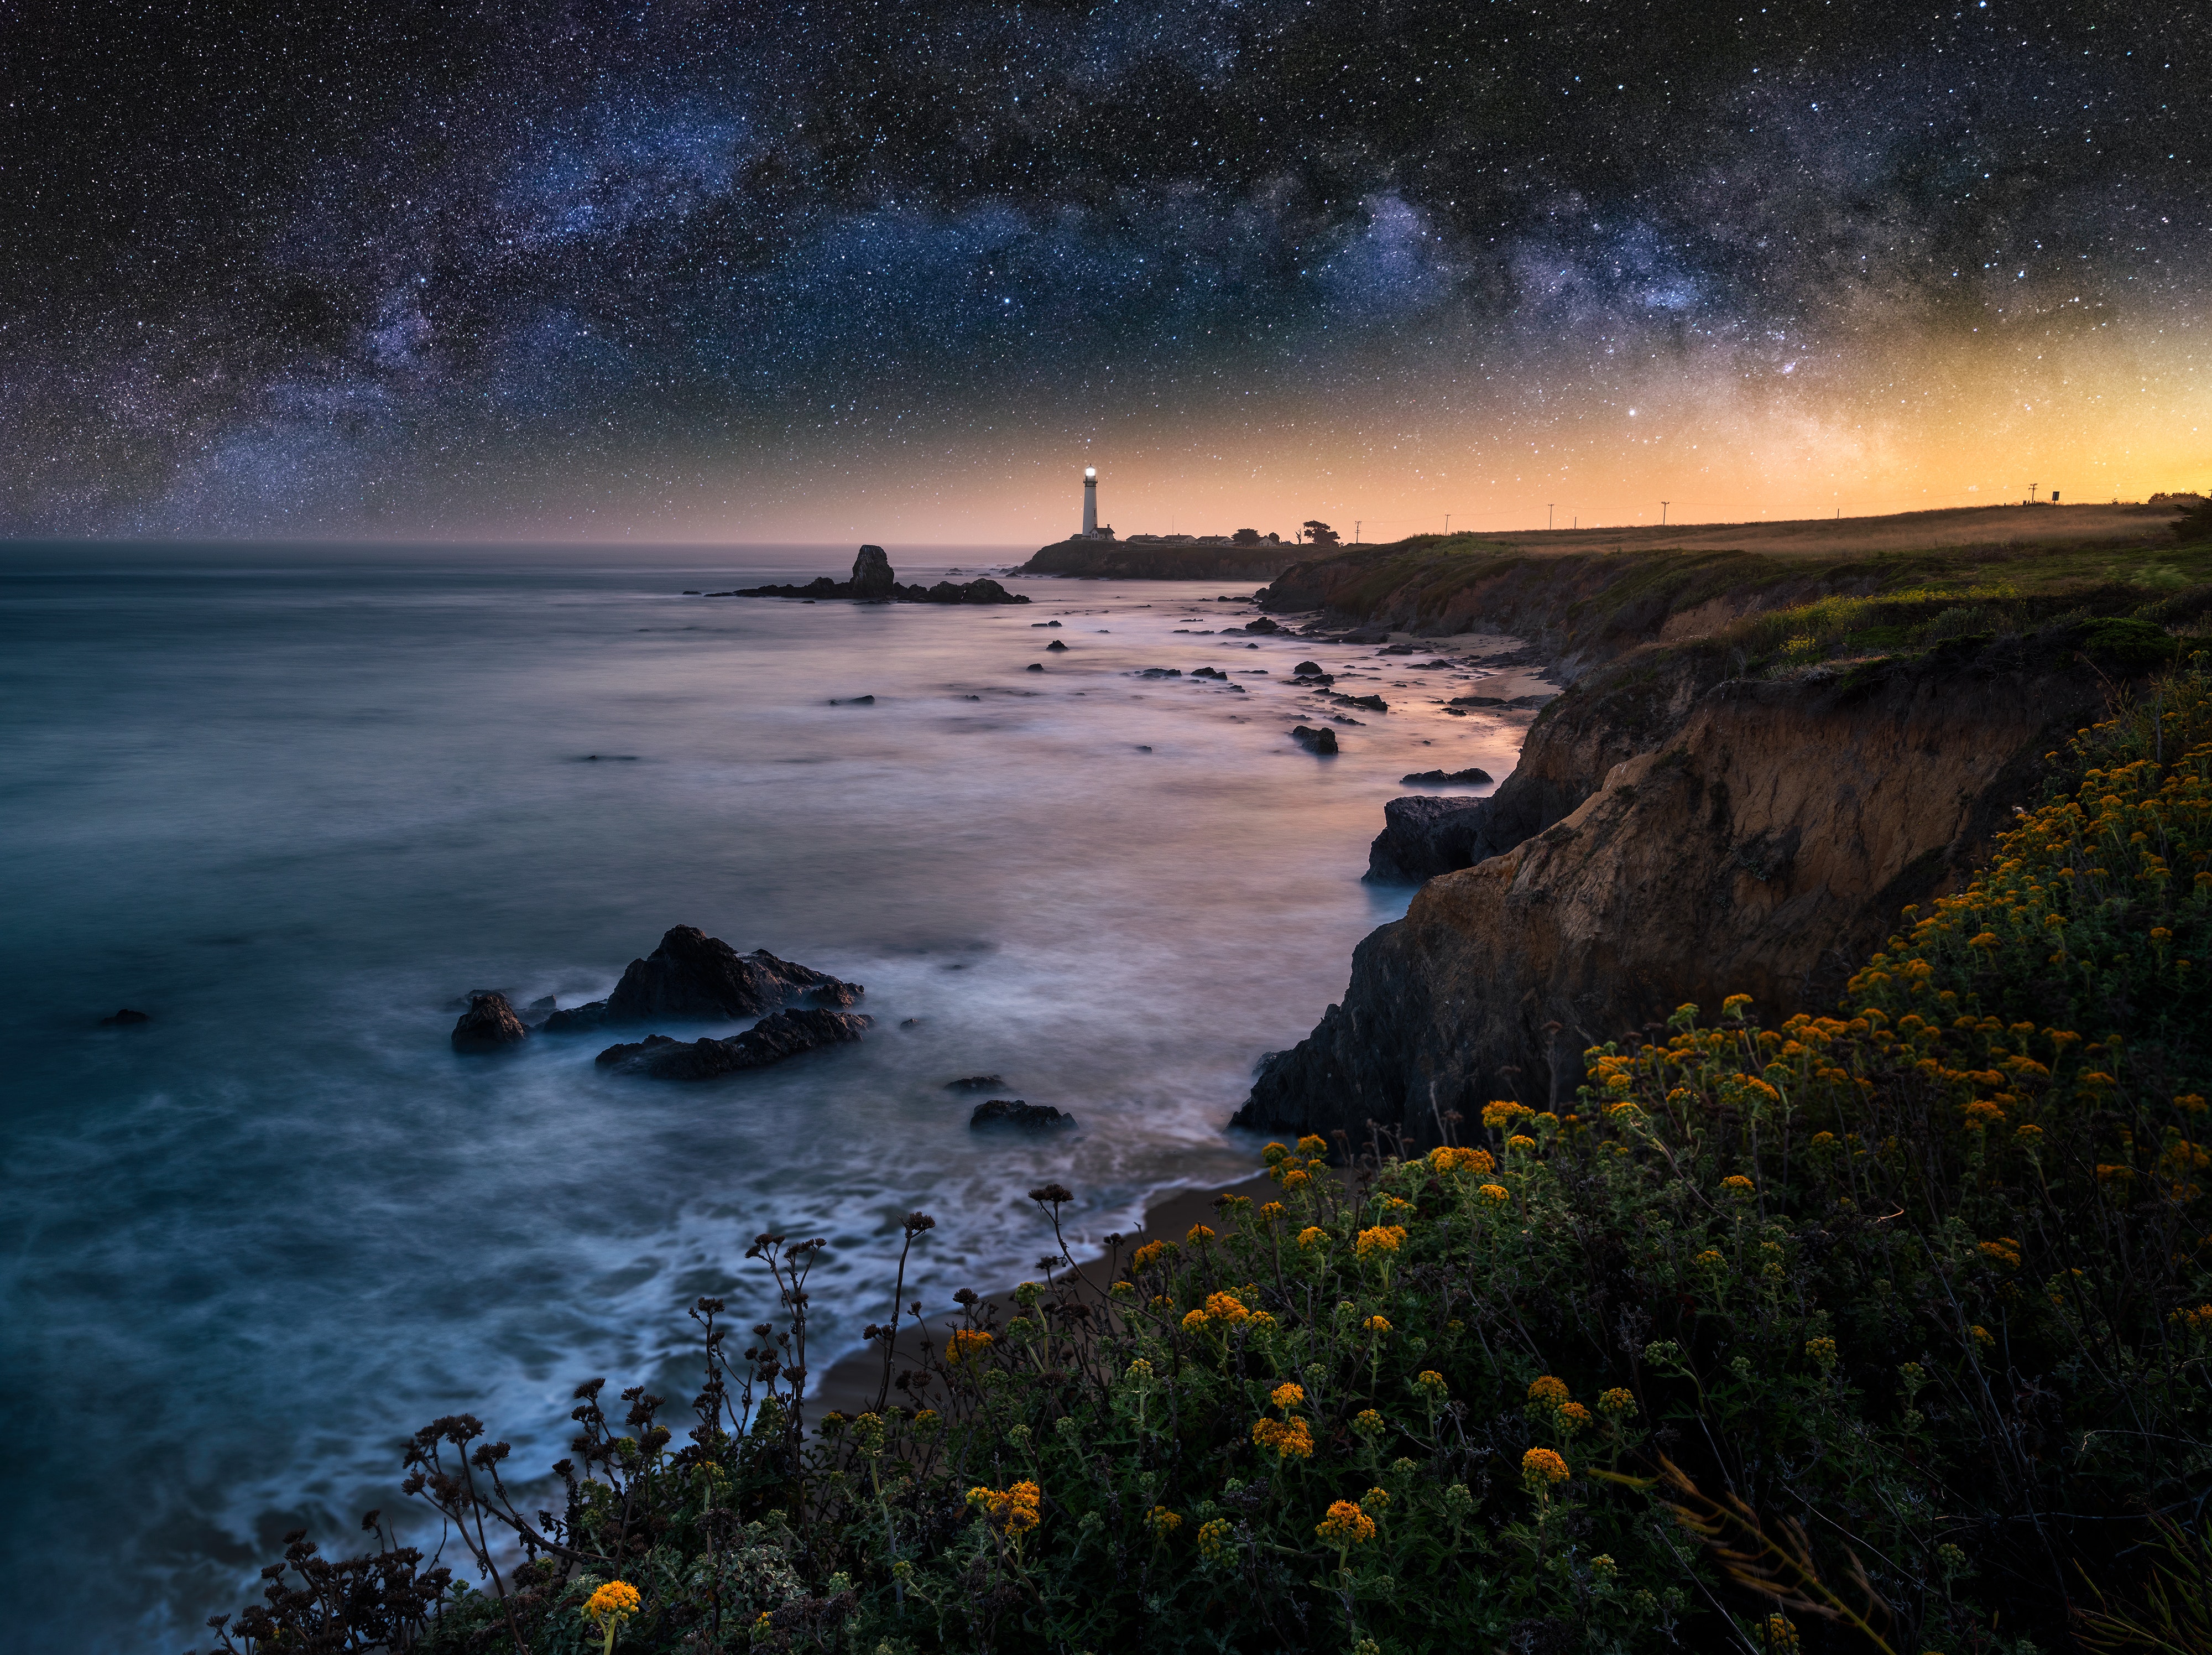 General 4000x2992 landscape nightscape photography California USA lighthouse dreamscape nature sea cliff sunset long exposure